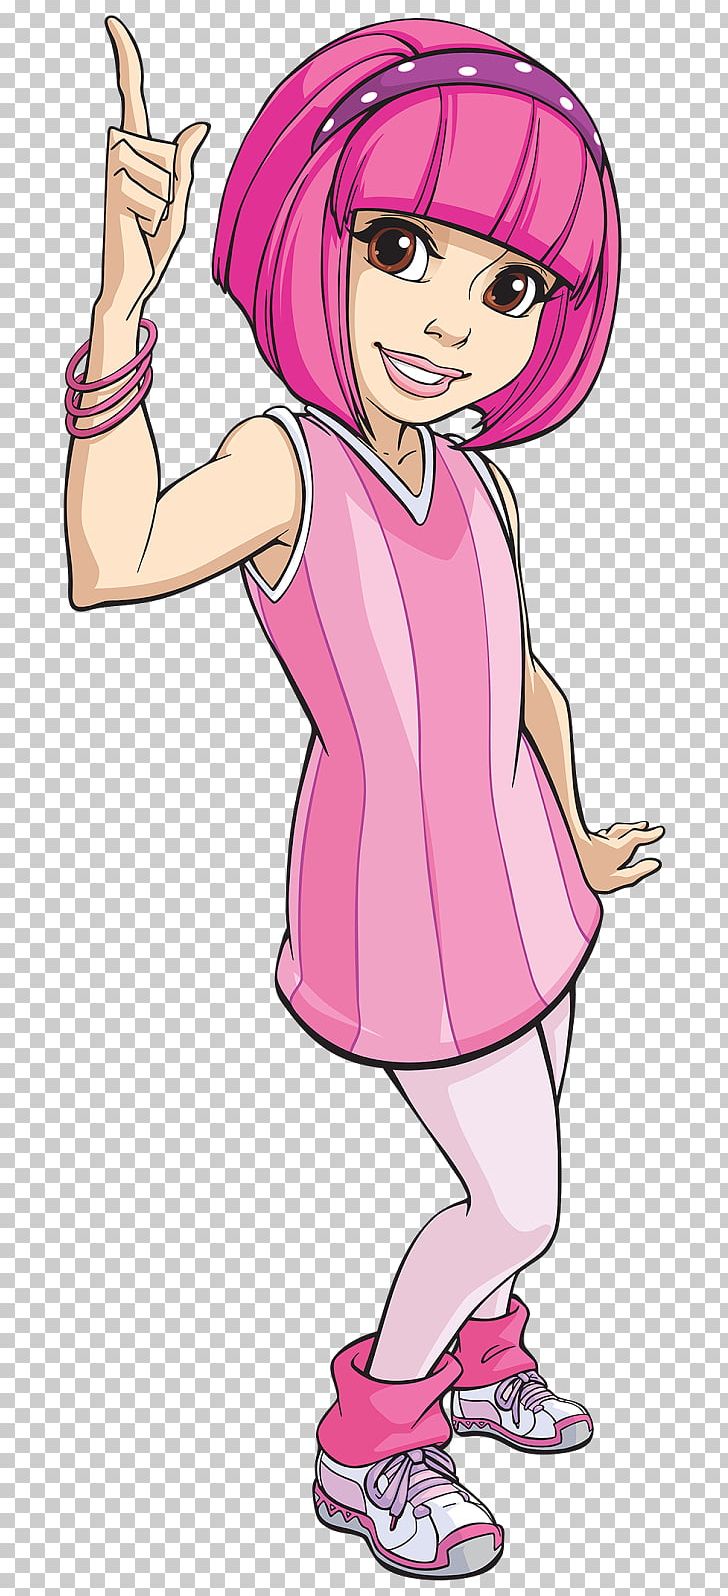 LazyTown Stephanie Cartoon PNG, Clipart, Anime, Arm, Beauty, Brown Hair, Cartoon Characters Free PNG Download